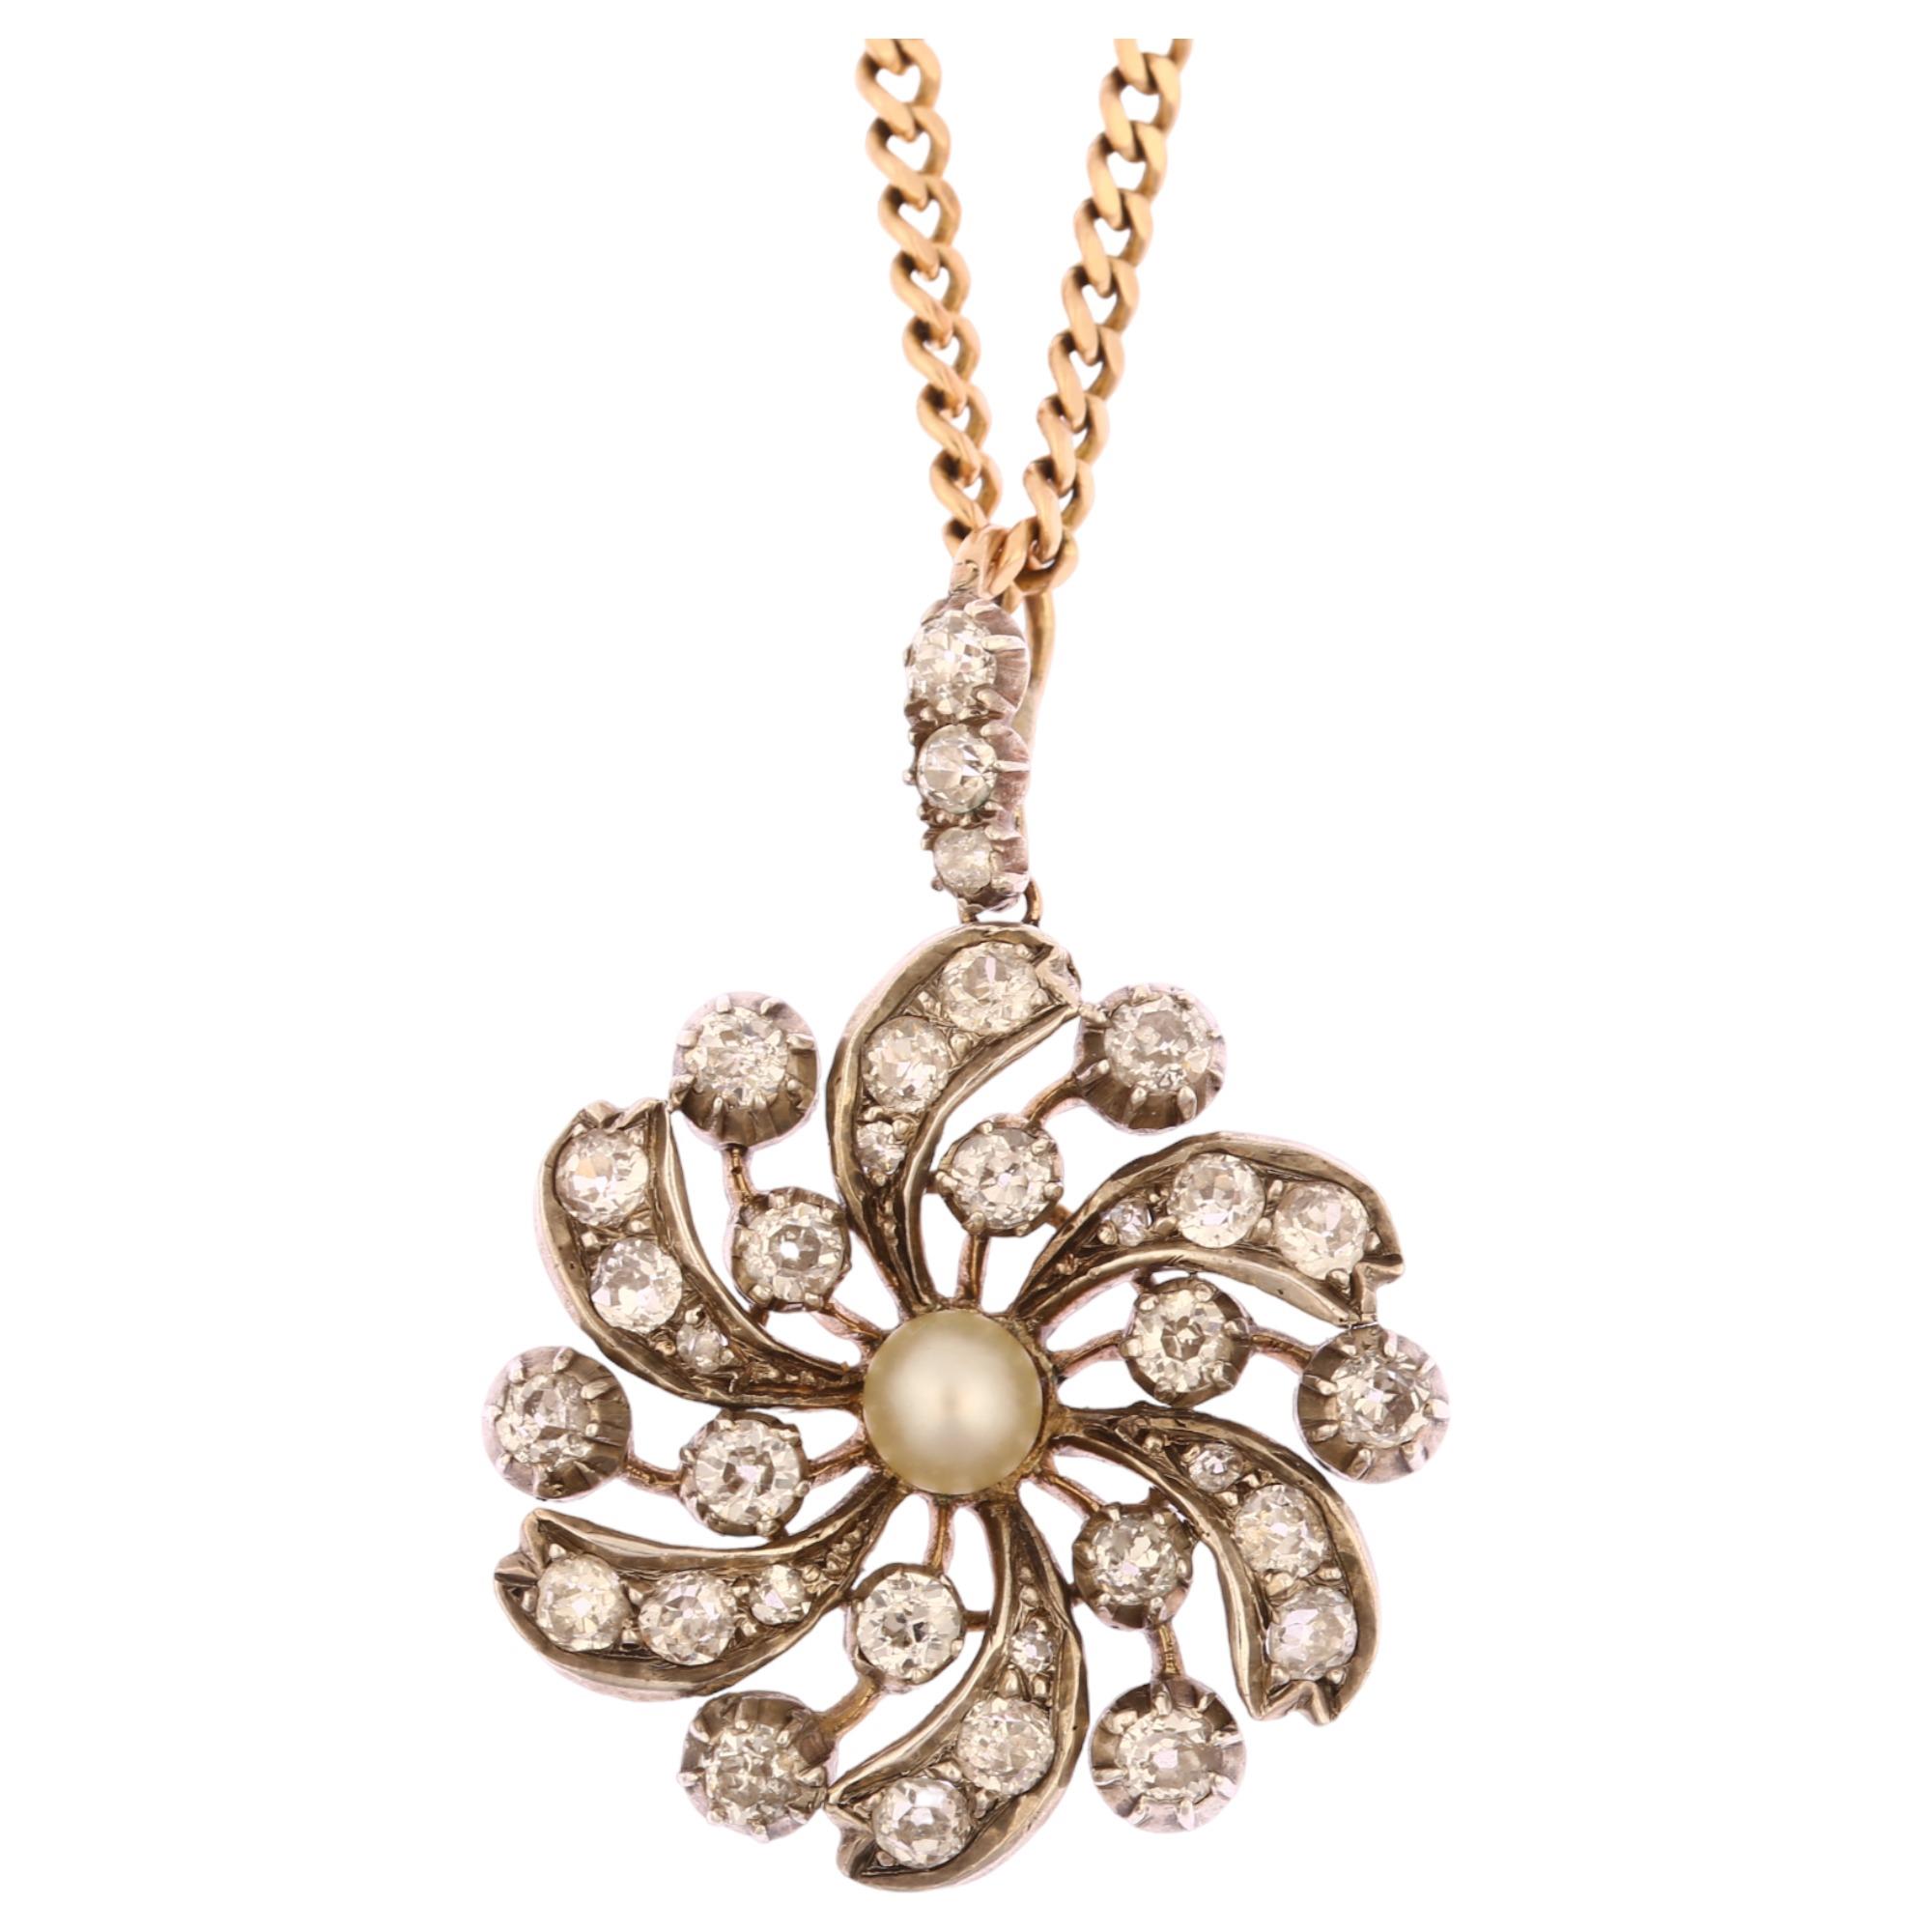 A Victorian natural pearl and diamond flowerhead pendant necklace, circa 1880, unmarked silver and